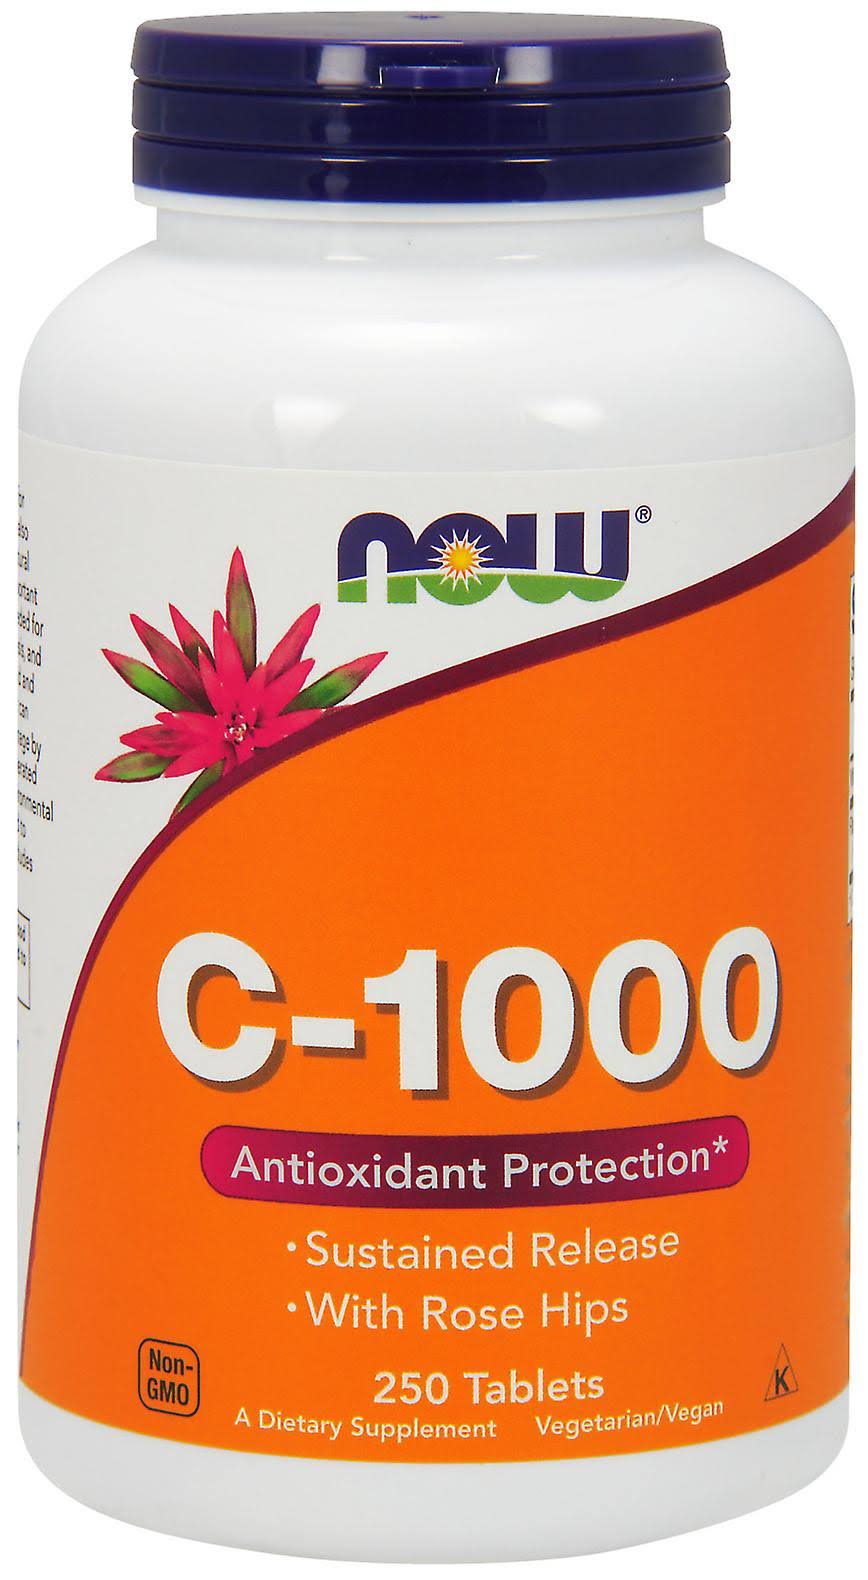 Now Foods C-1000 Antioxidant Protection Supplement - Sustained Released with Rose Hips, 250 Tablets